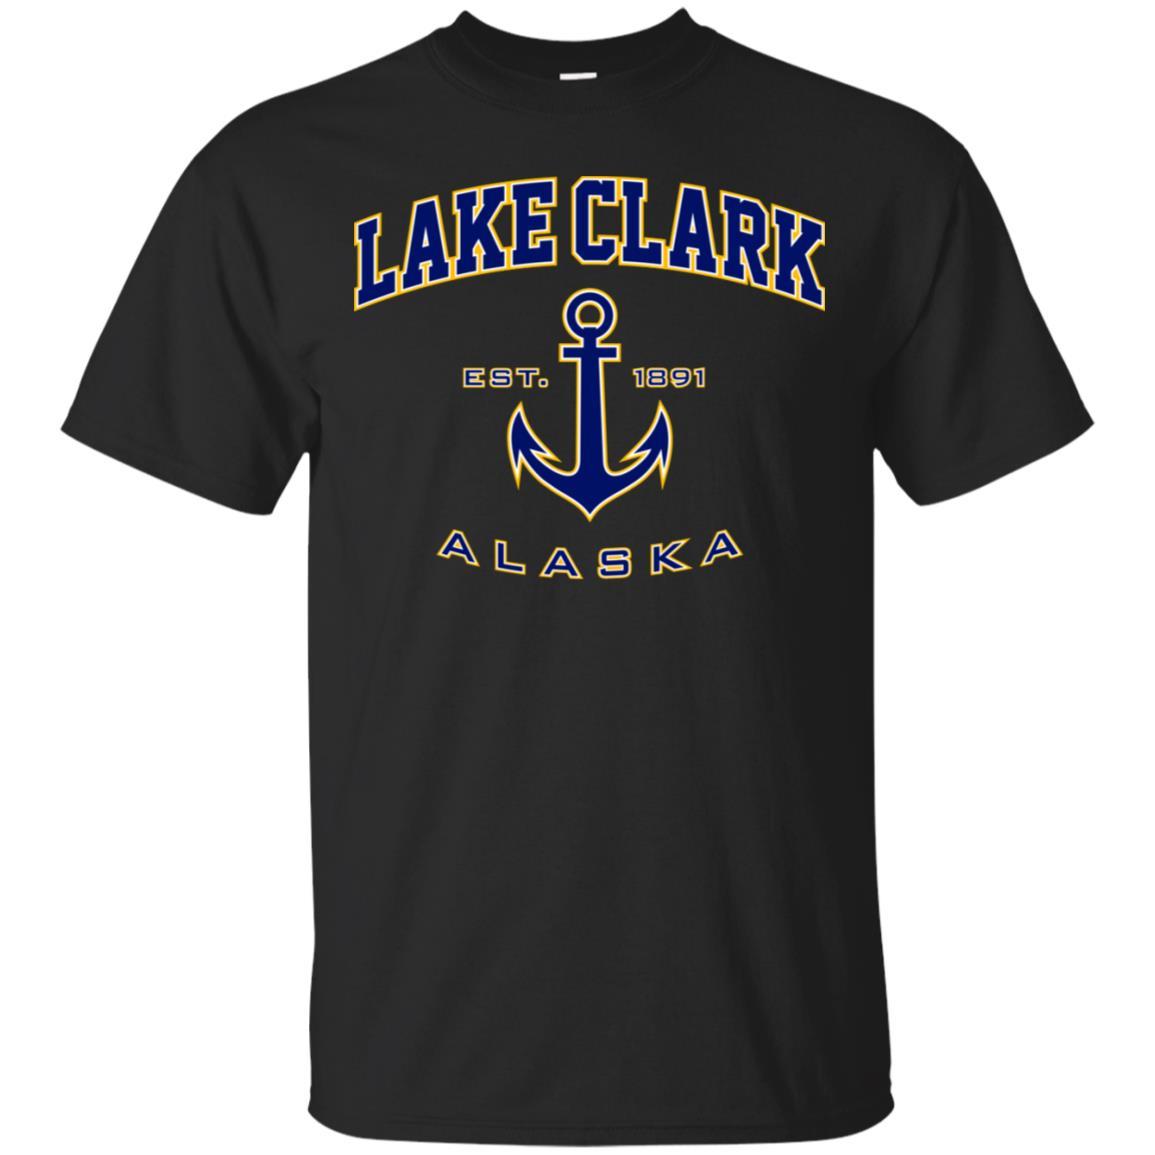 Cover Your Body With Amazing Lake Clark Alaska For T Shirt